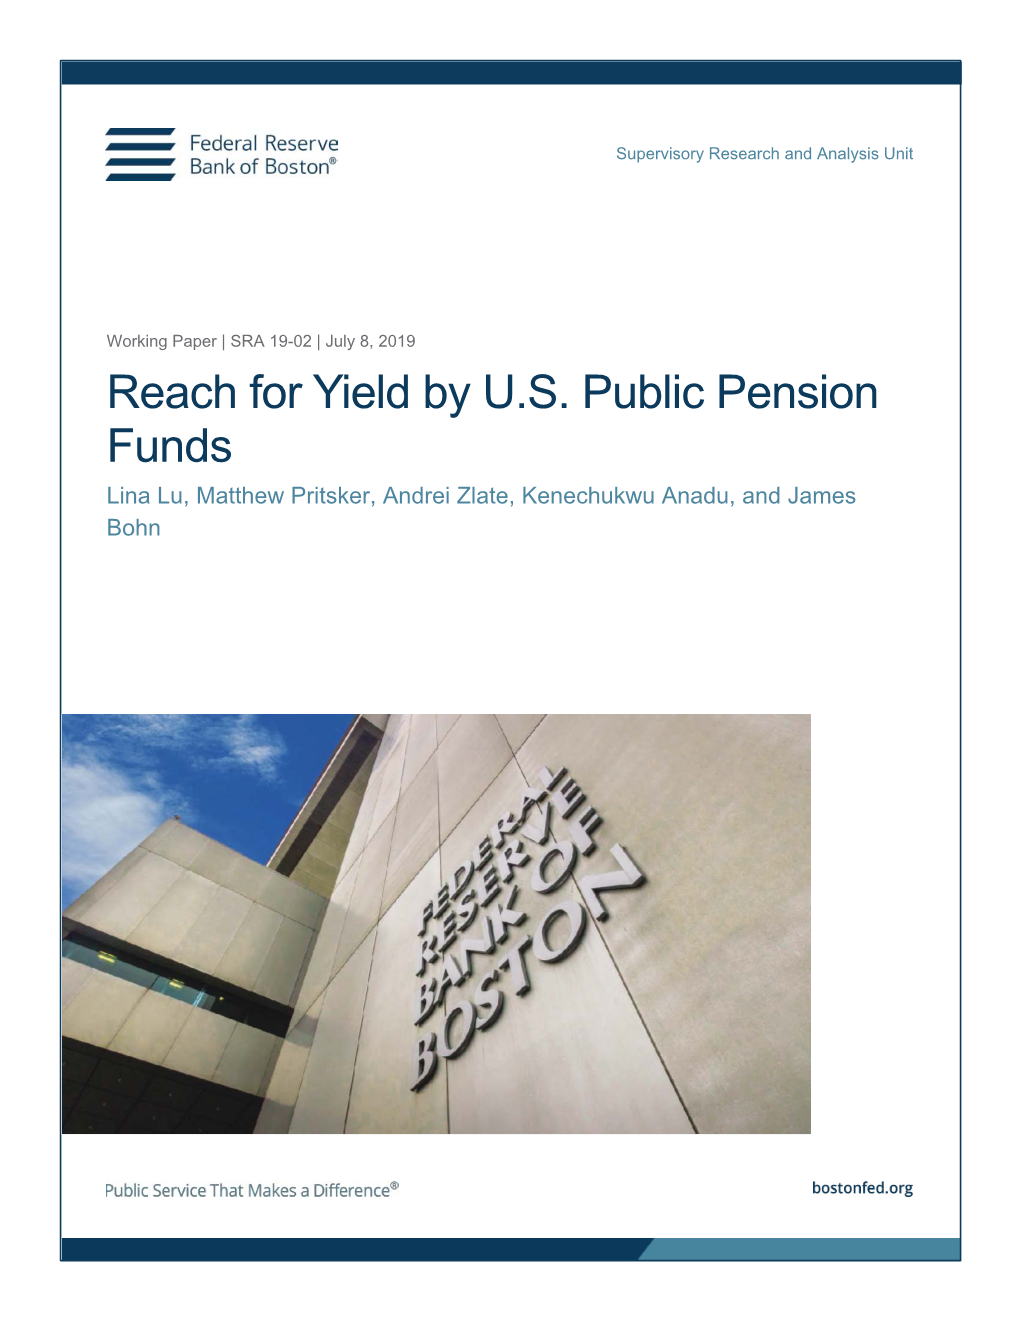 Reach for Yield by U.S. Public Pension Funds